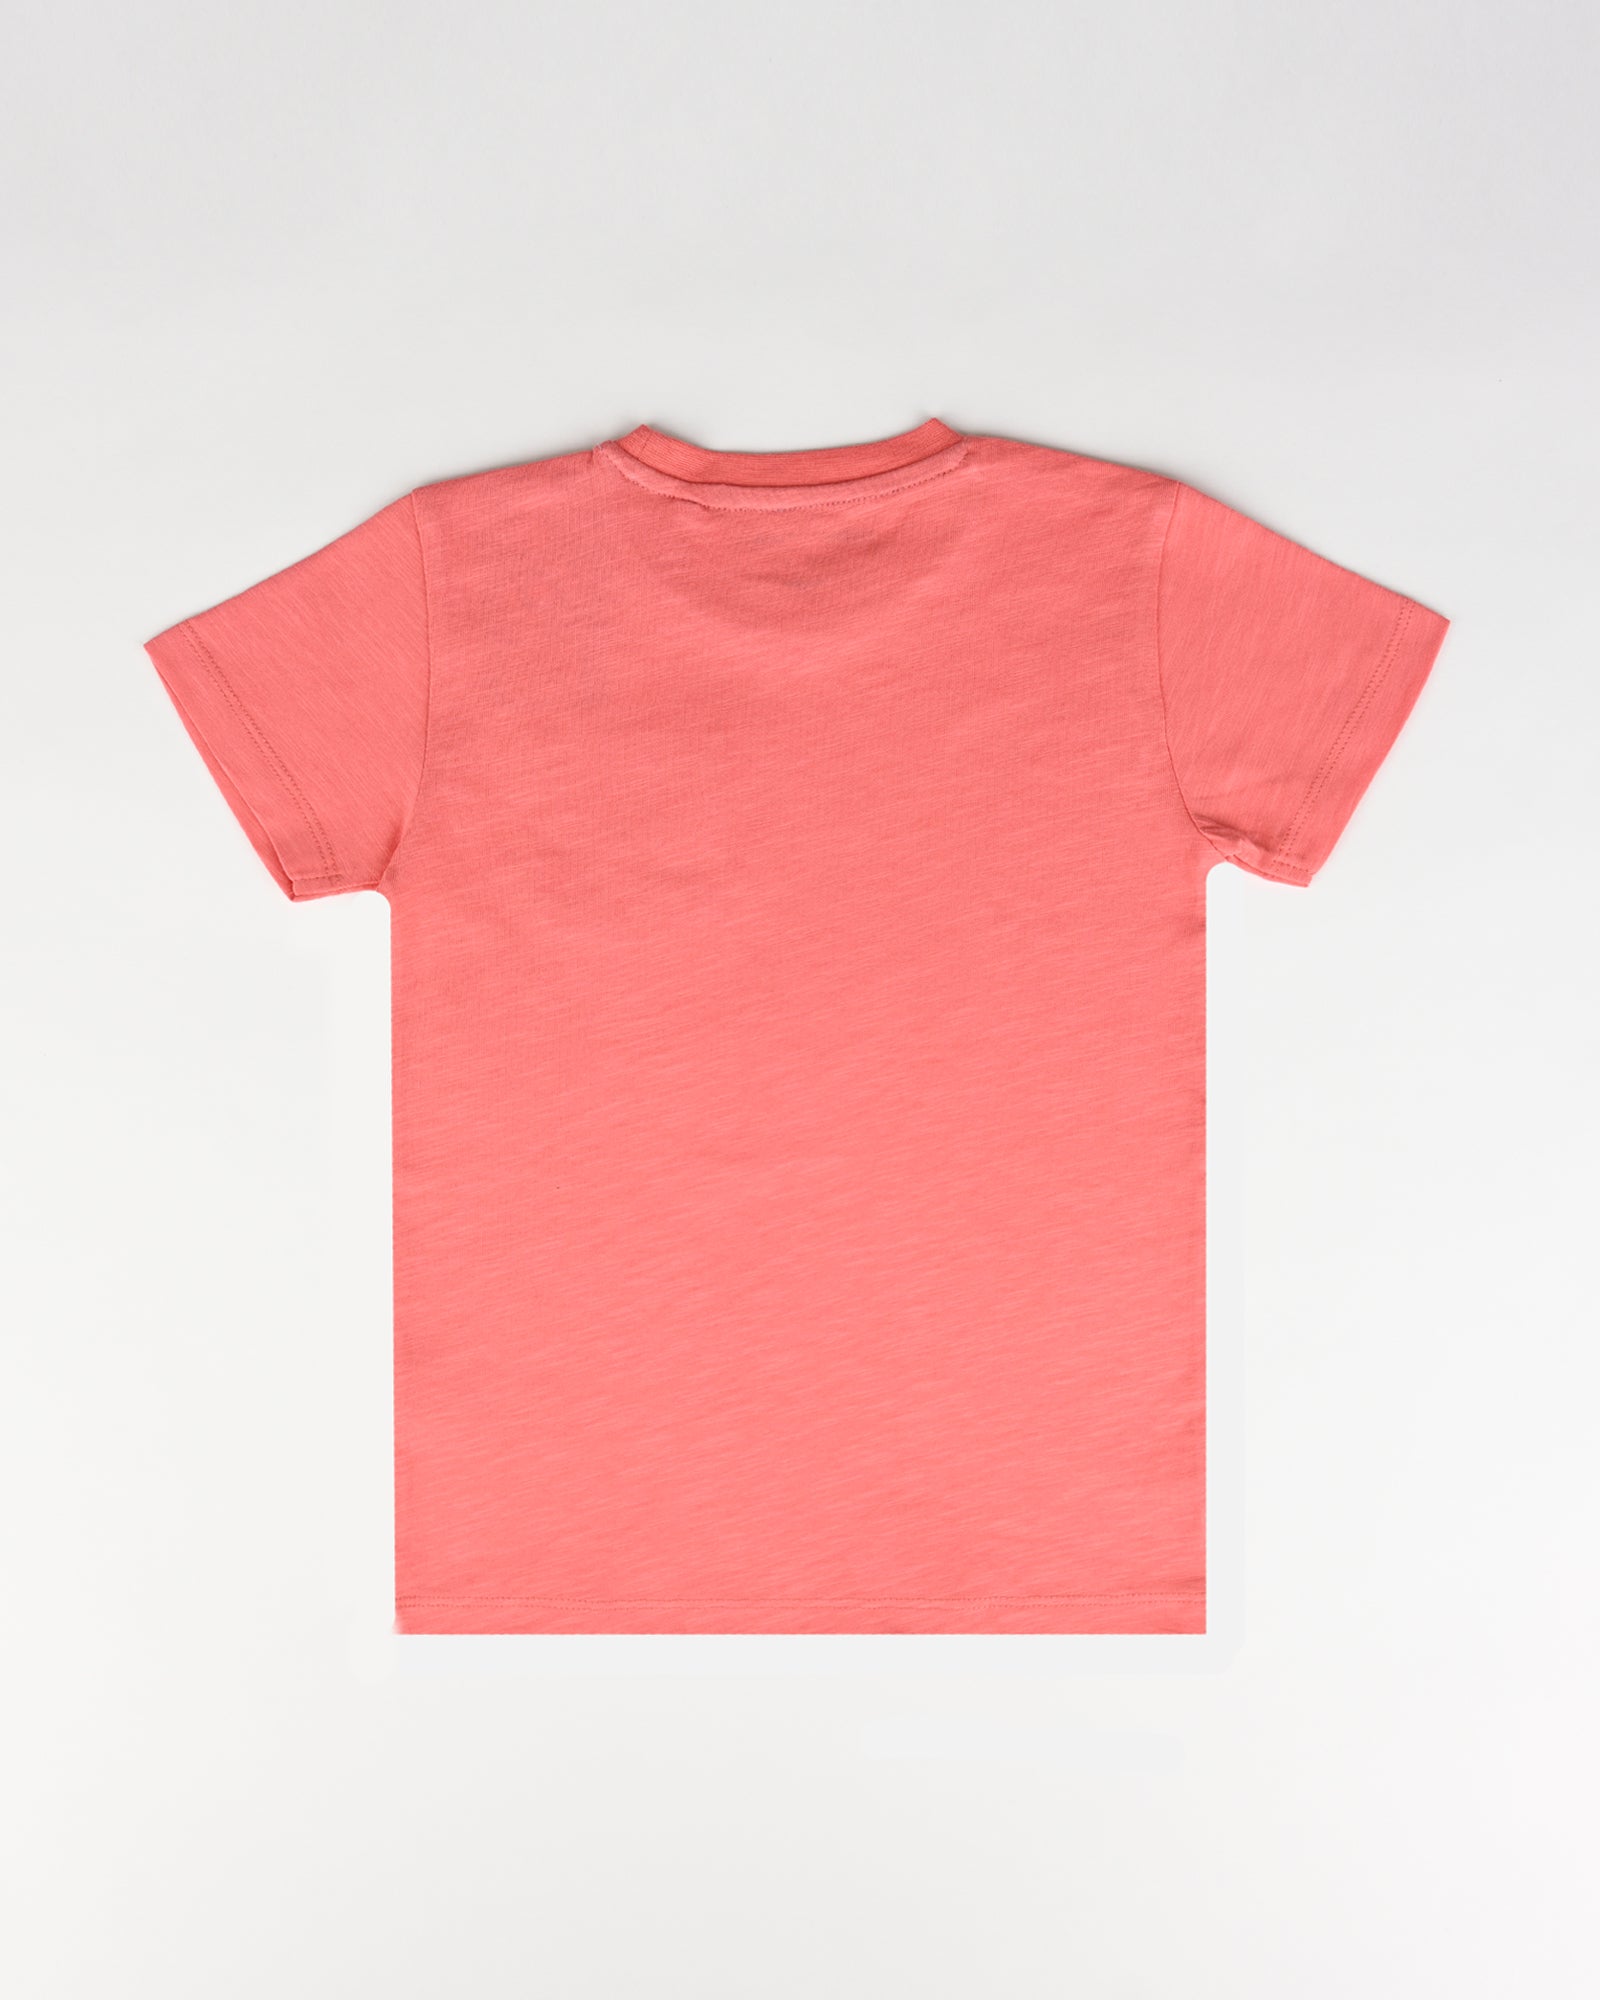 Boys Solid Cotton T-Shirt: Essential Comfort and Style in One